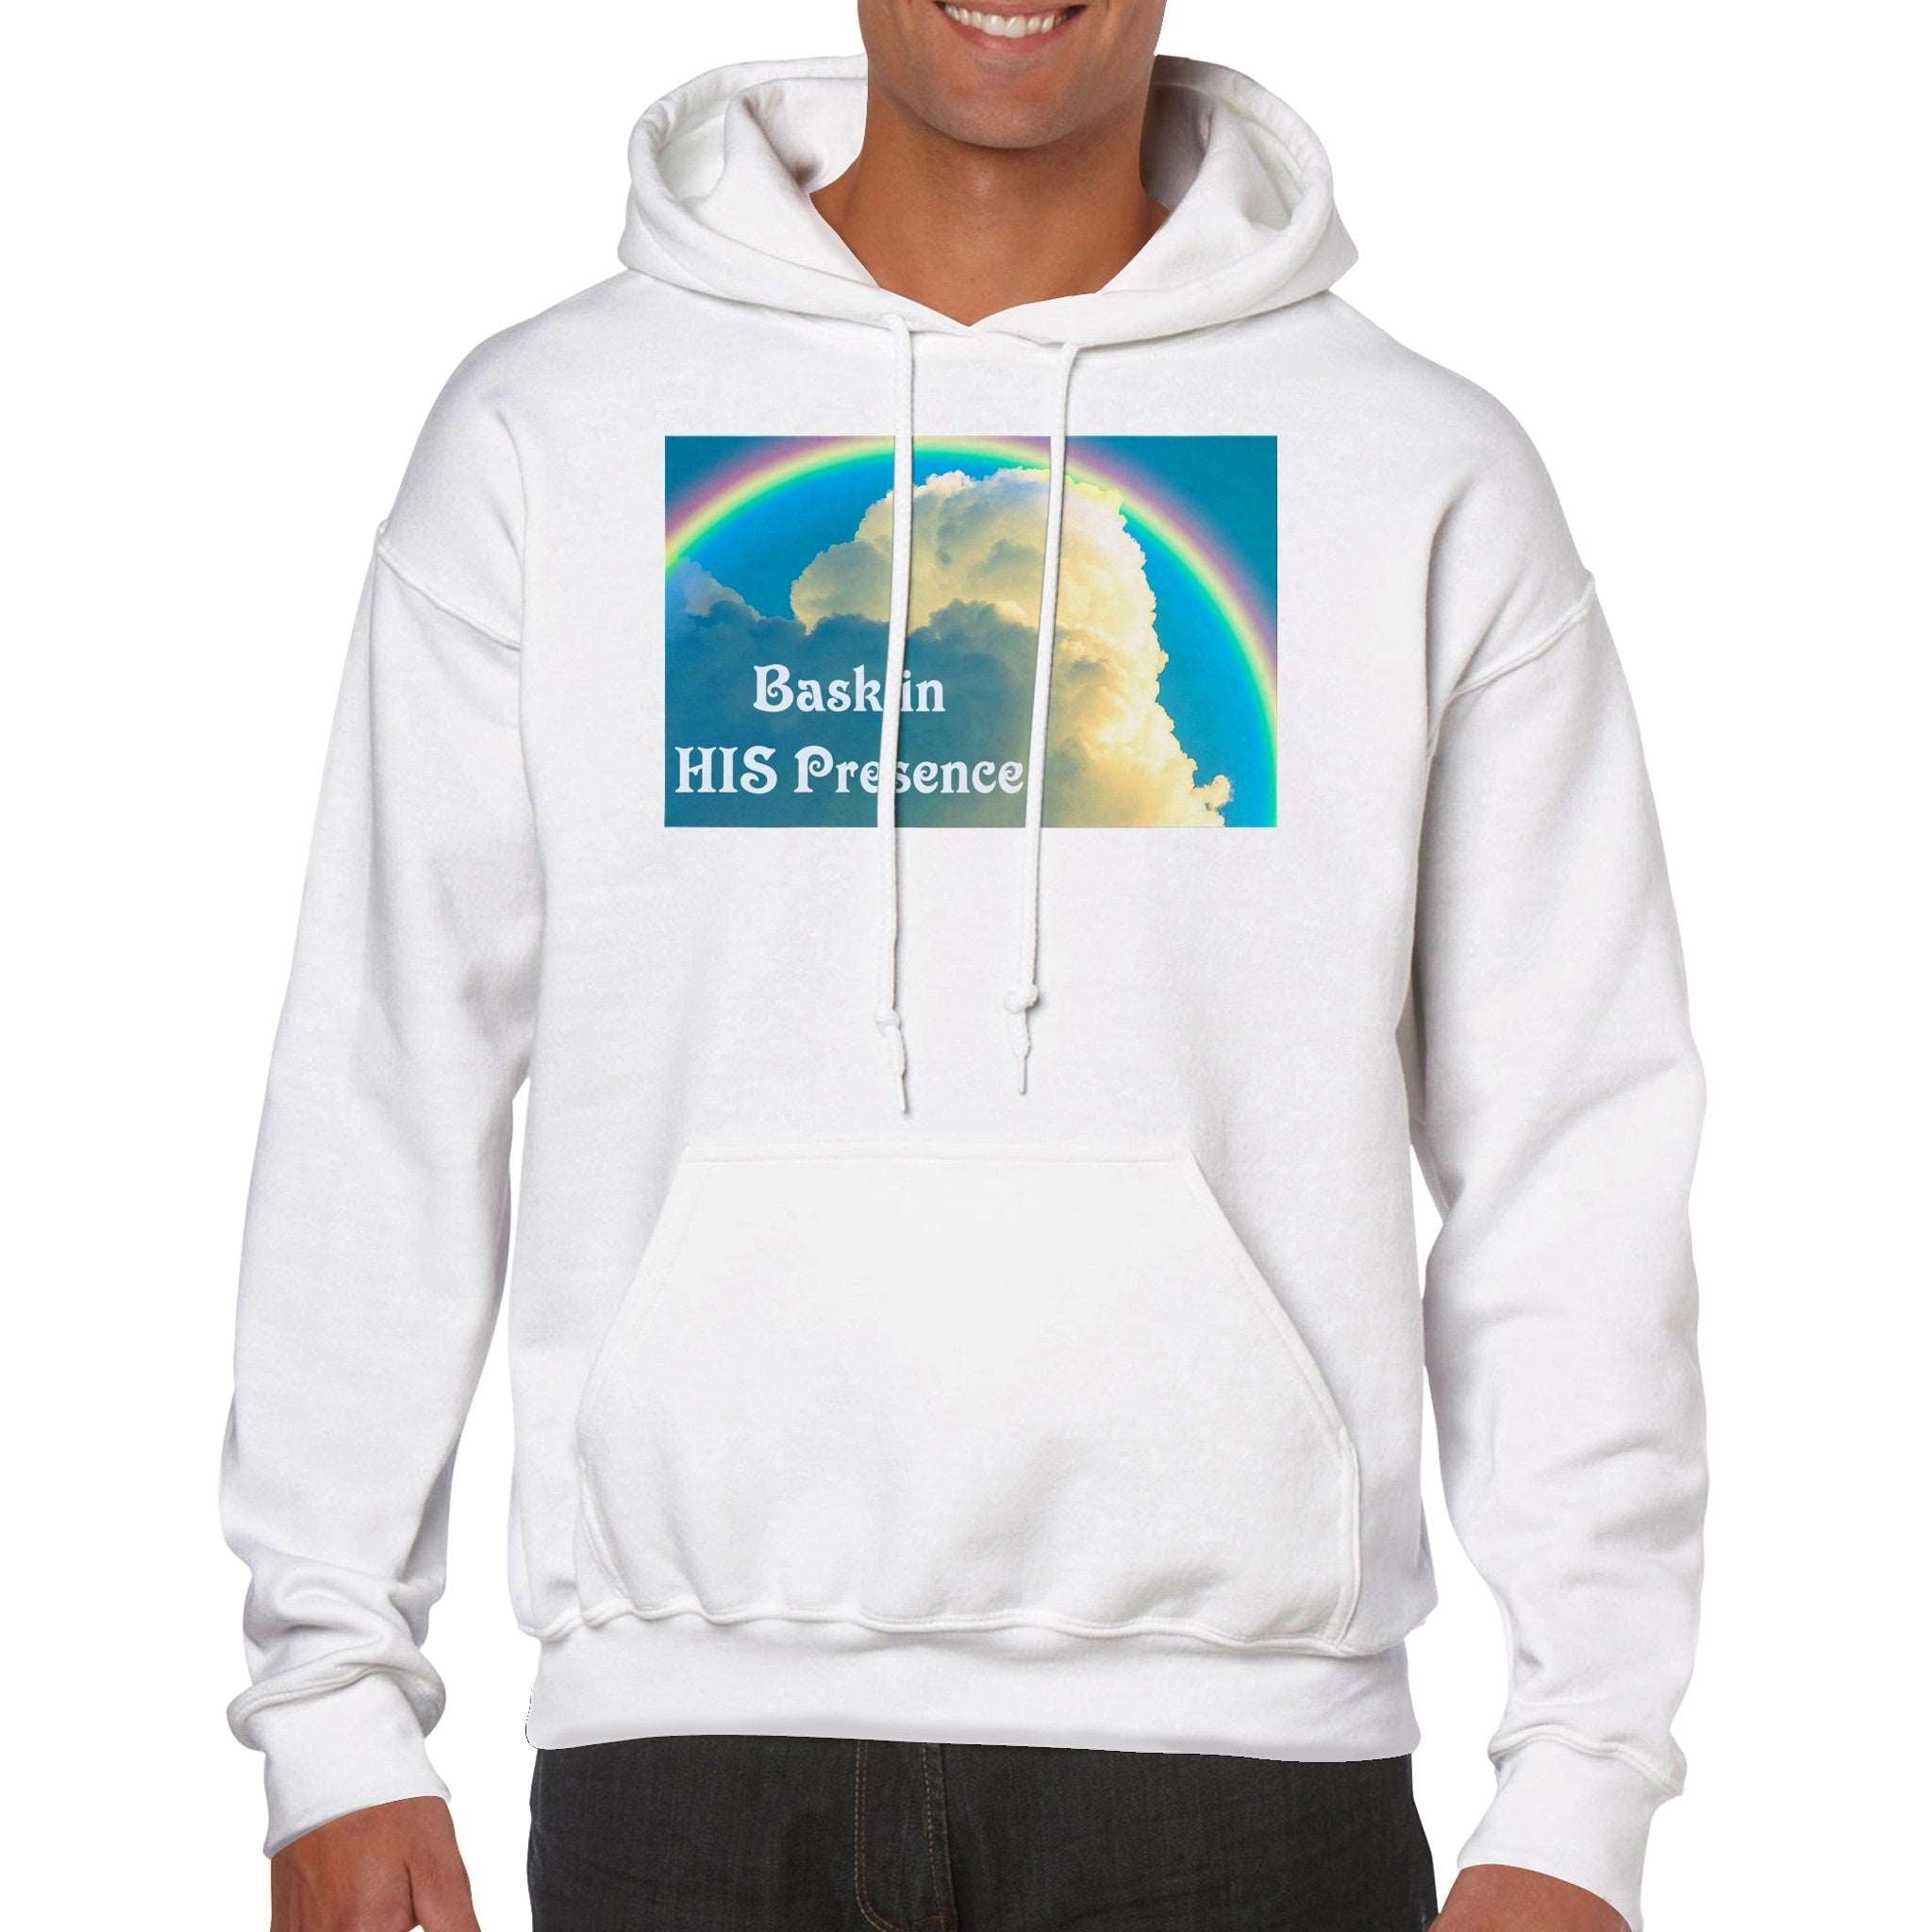 Bask in HIS Presence Clouds and Rainbow Unisex Pullover Hoodie up to 3XL